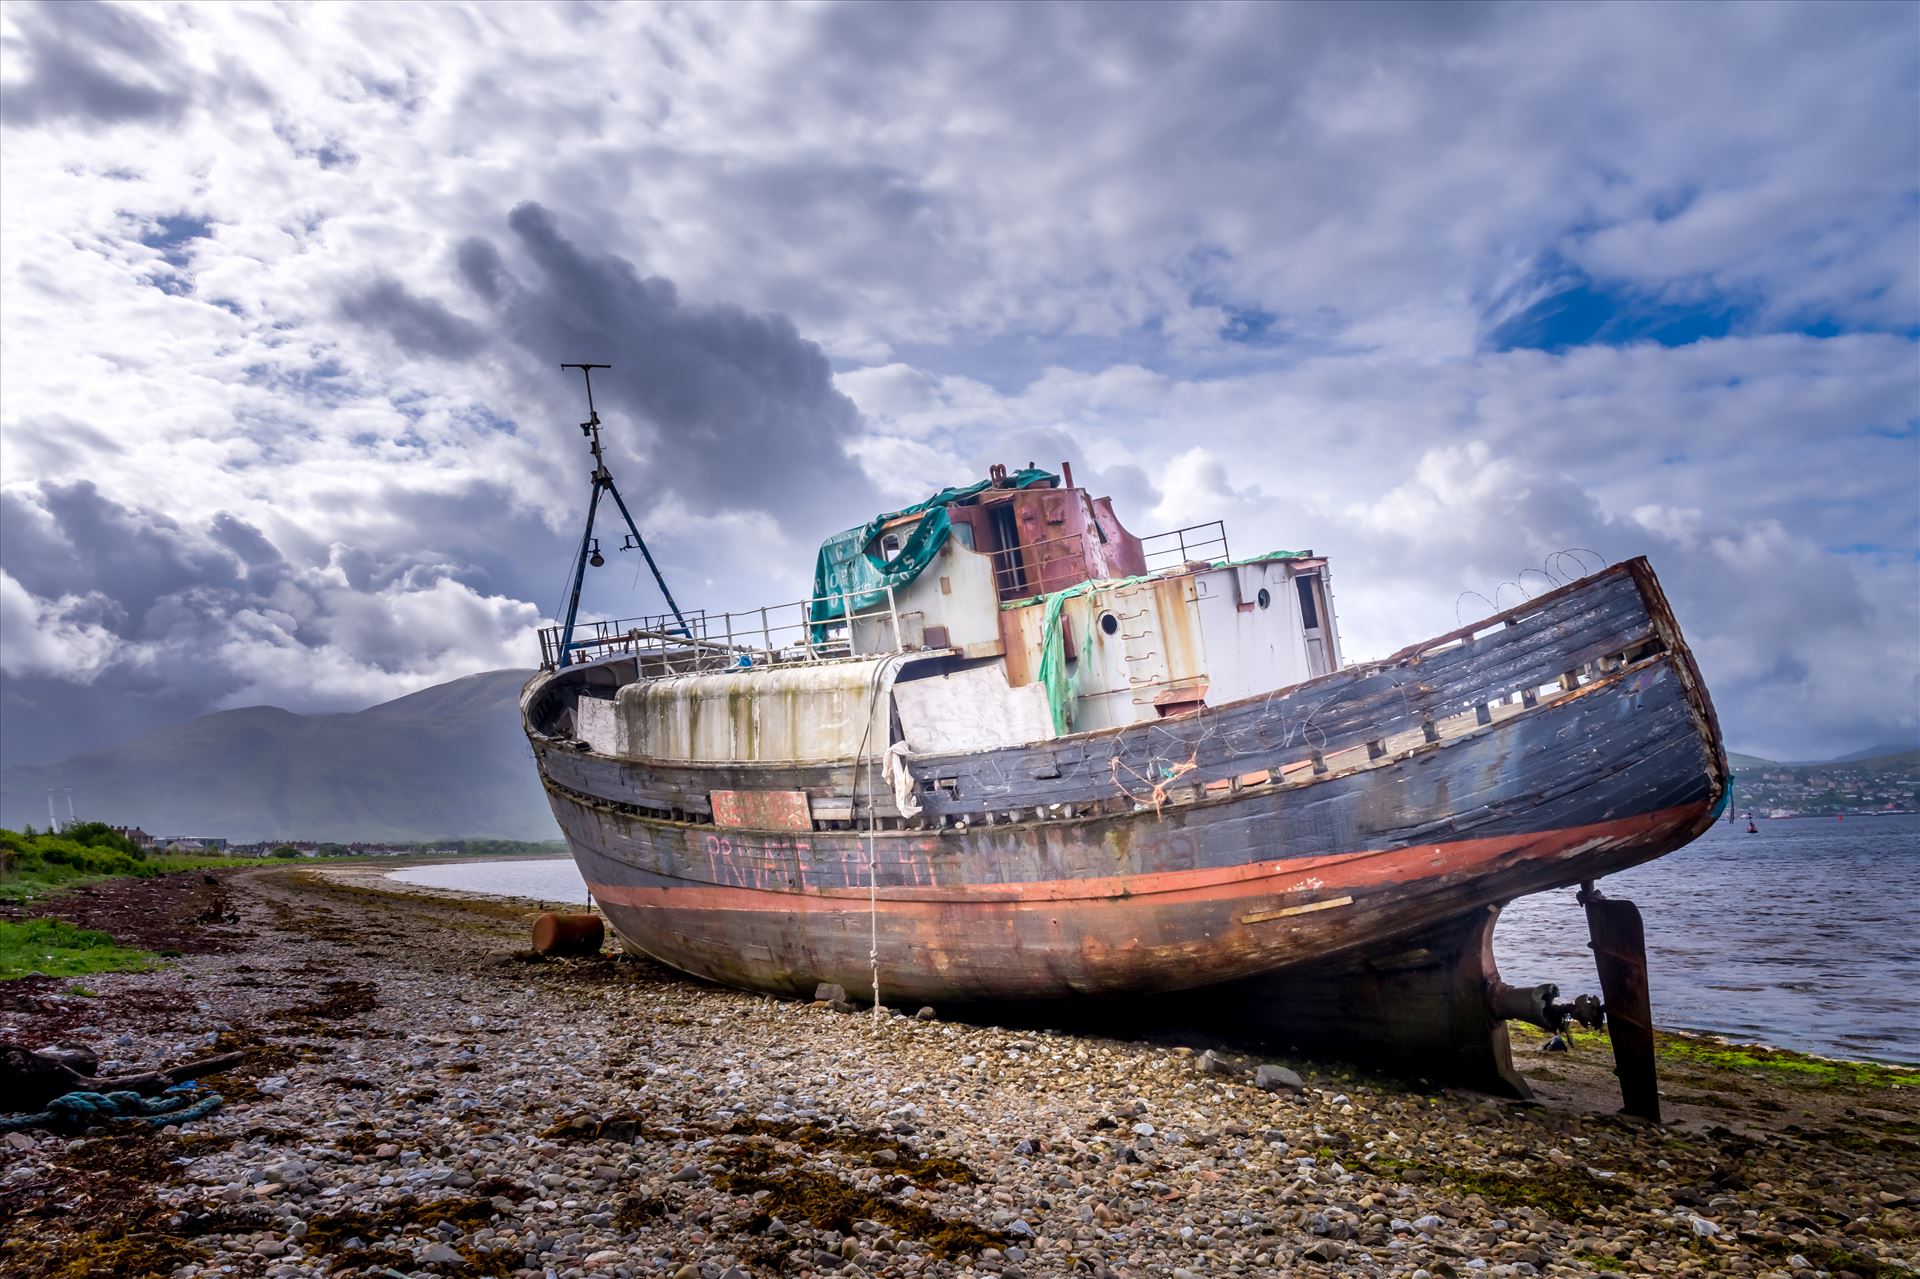 The Corpach wreck She has become known as, "The Corpach Wreck," however, her real name is MV Dayspring. Due to a raiser chain failure during a heavy storm she ran aground near the Corpach Sea Lock on the 8th December 2011 and has lain there ever since. by philreay